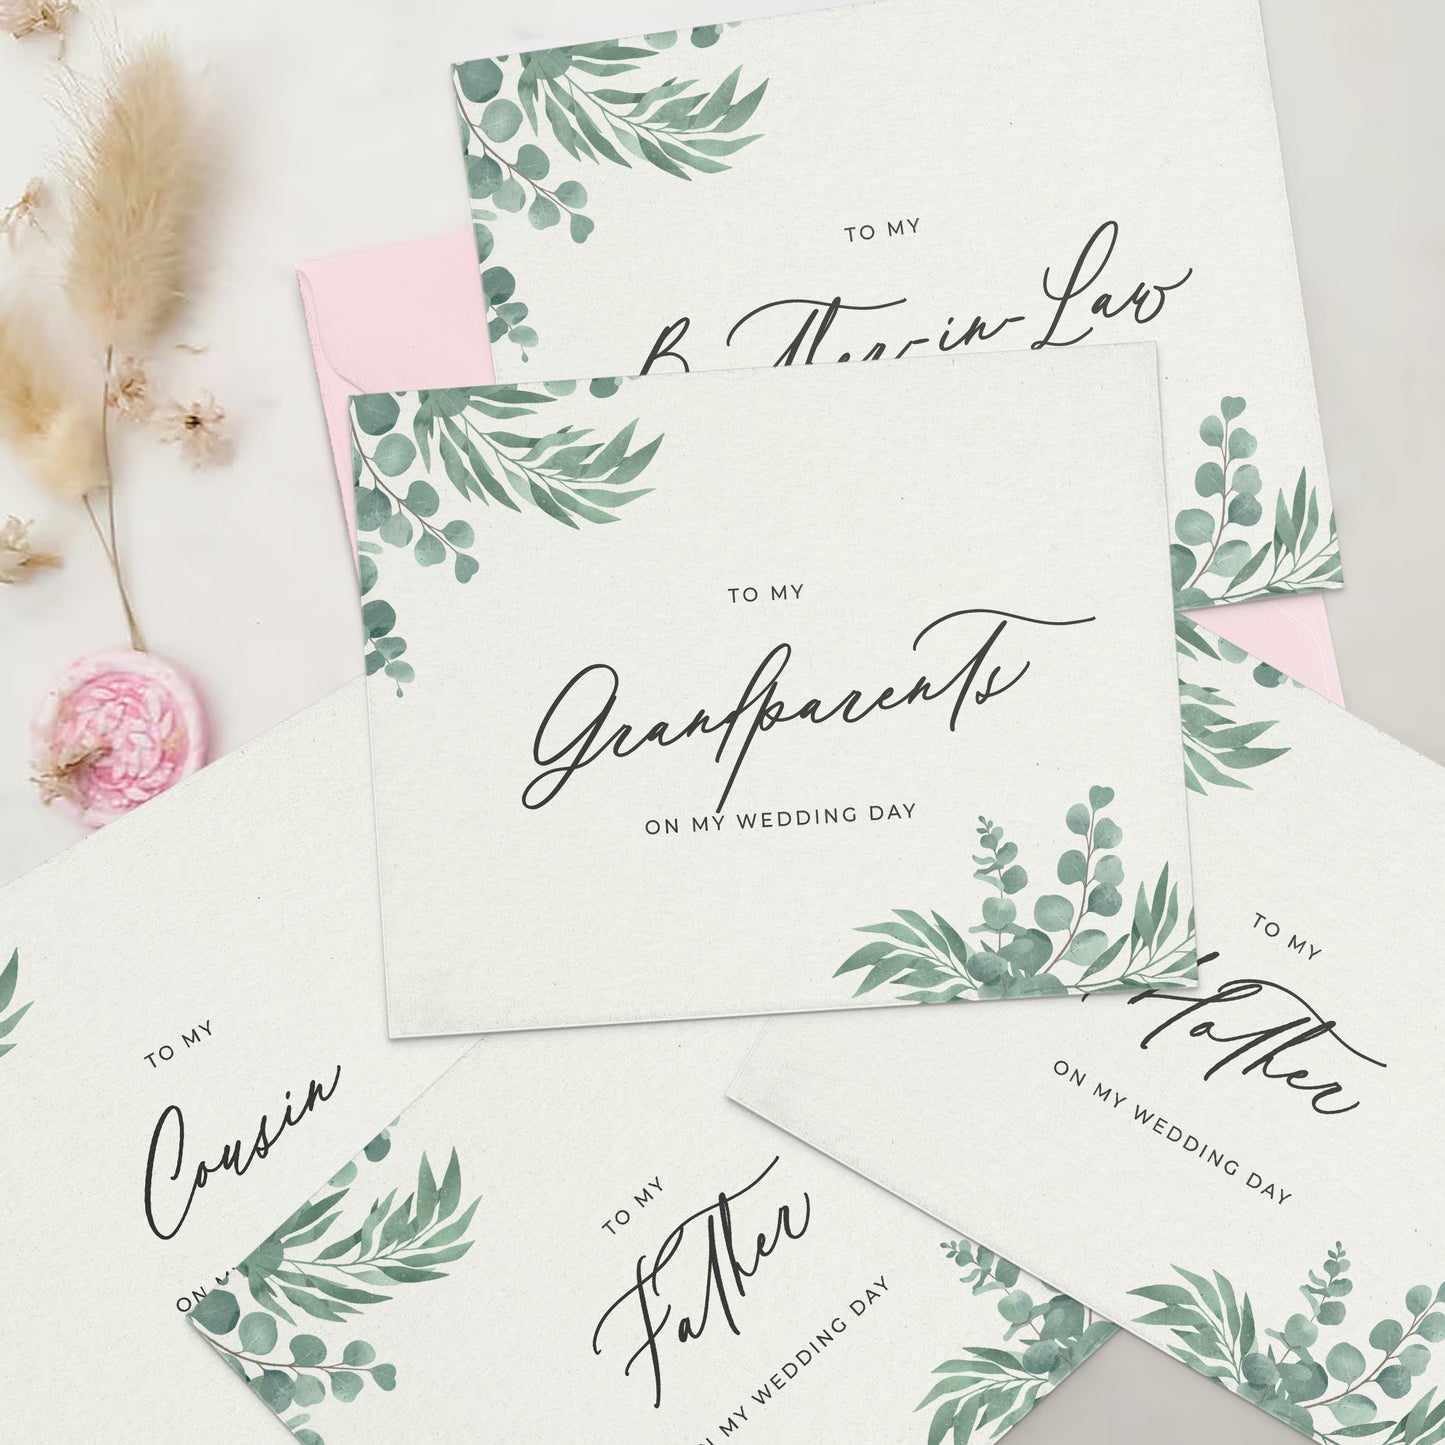 To my on mywedding day note cards collection in greenery design with eucalyptus leaves and calligraphy font from XOXOKristen.